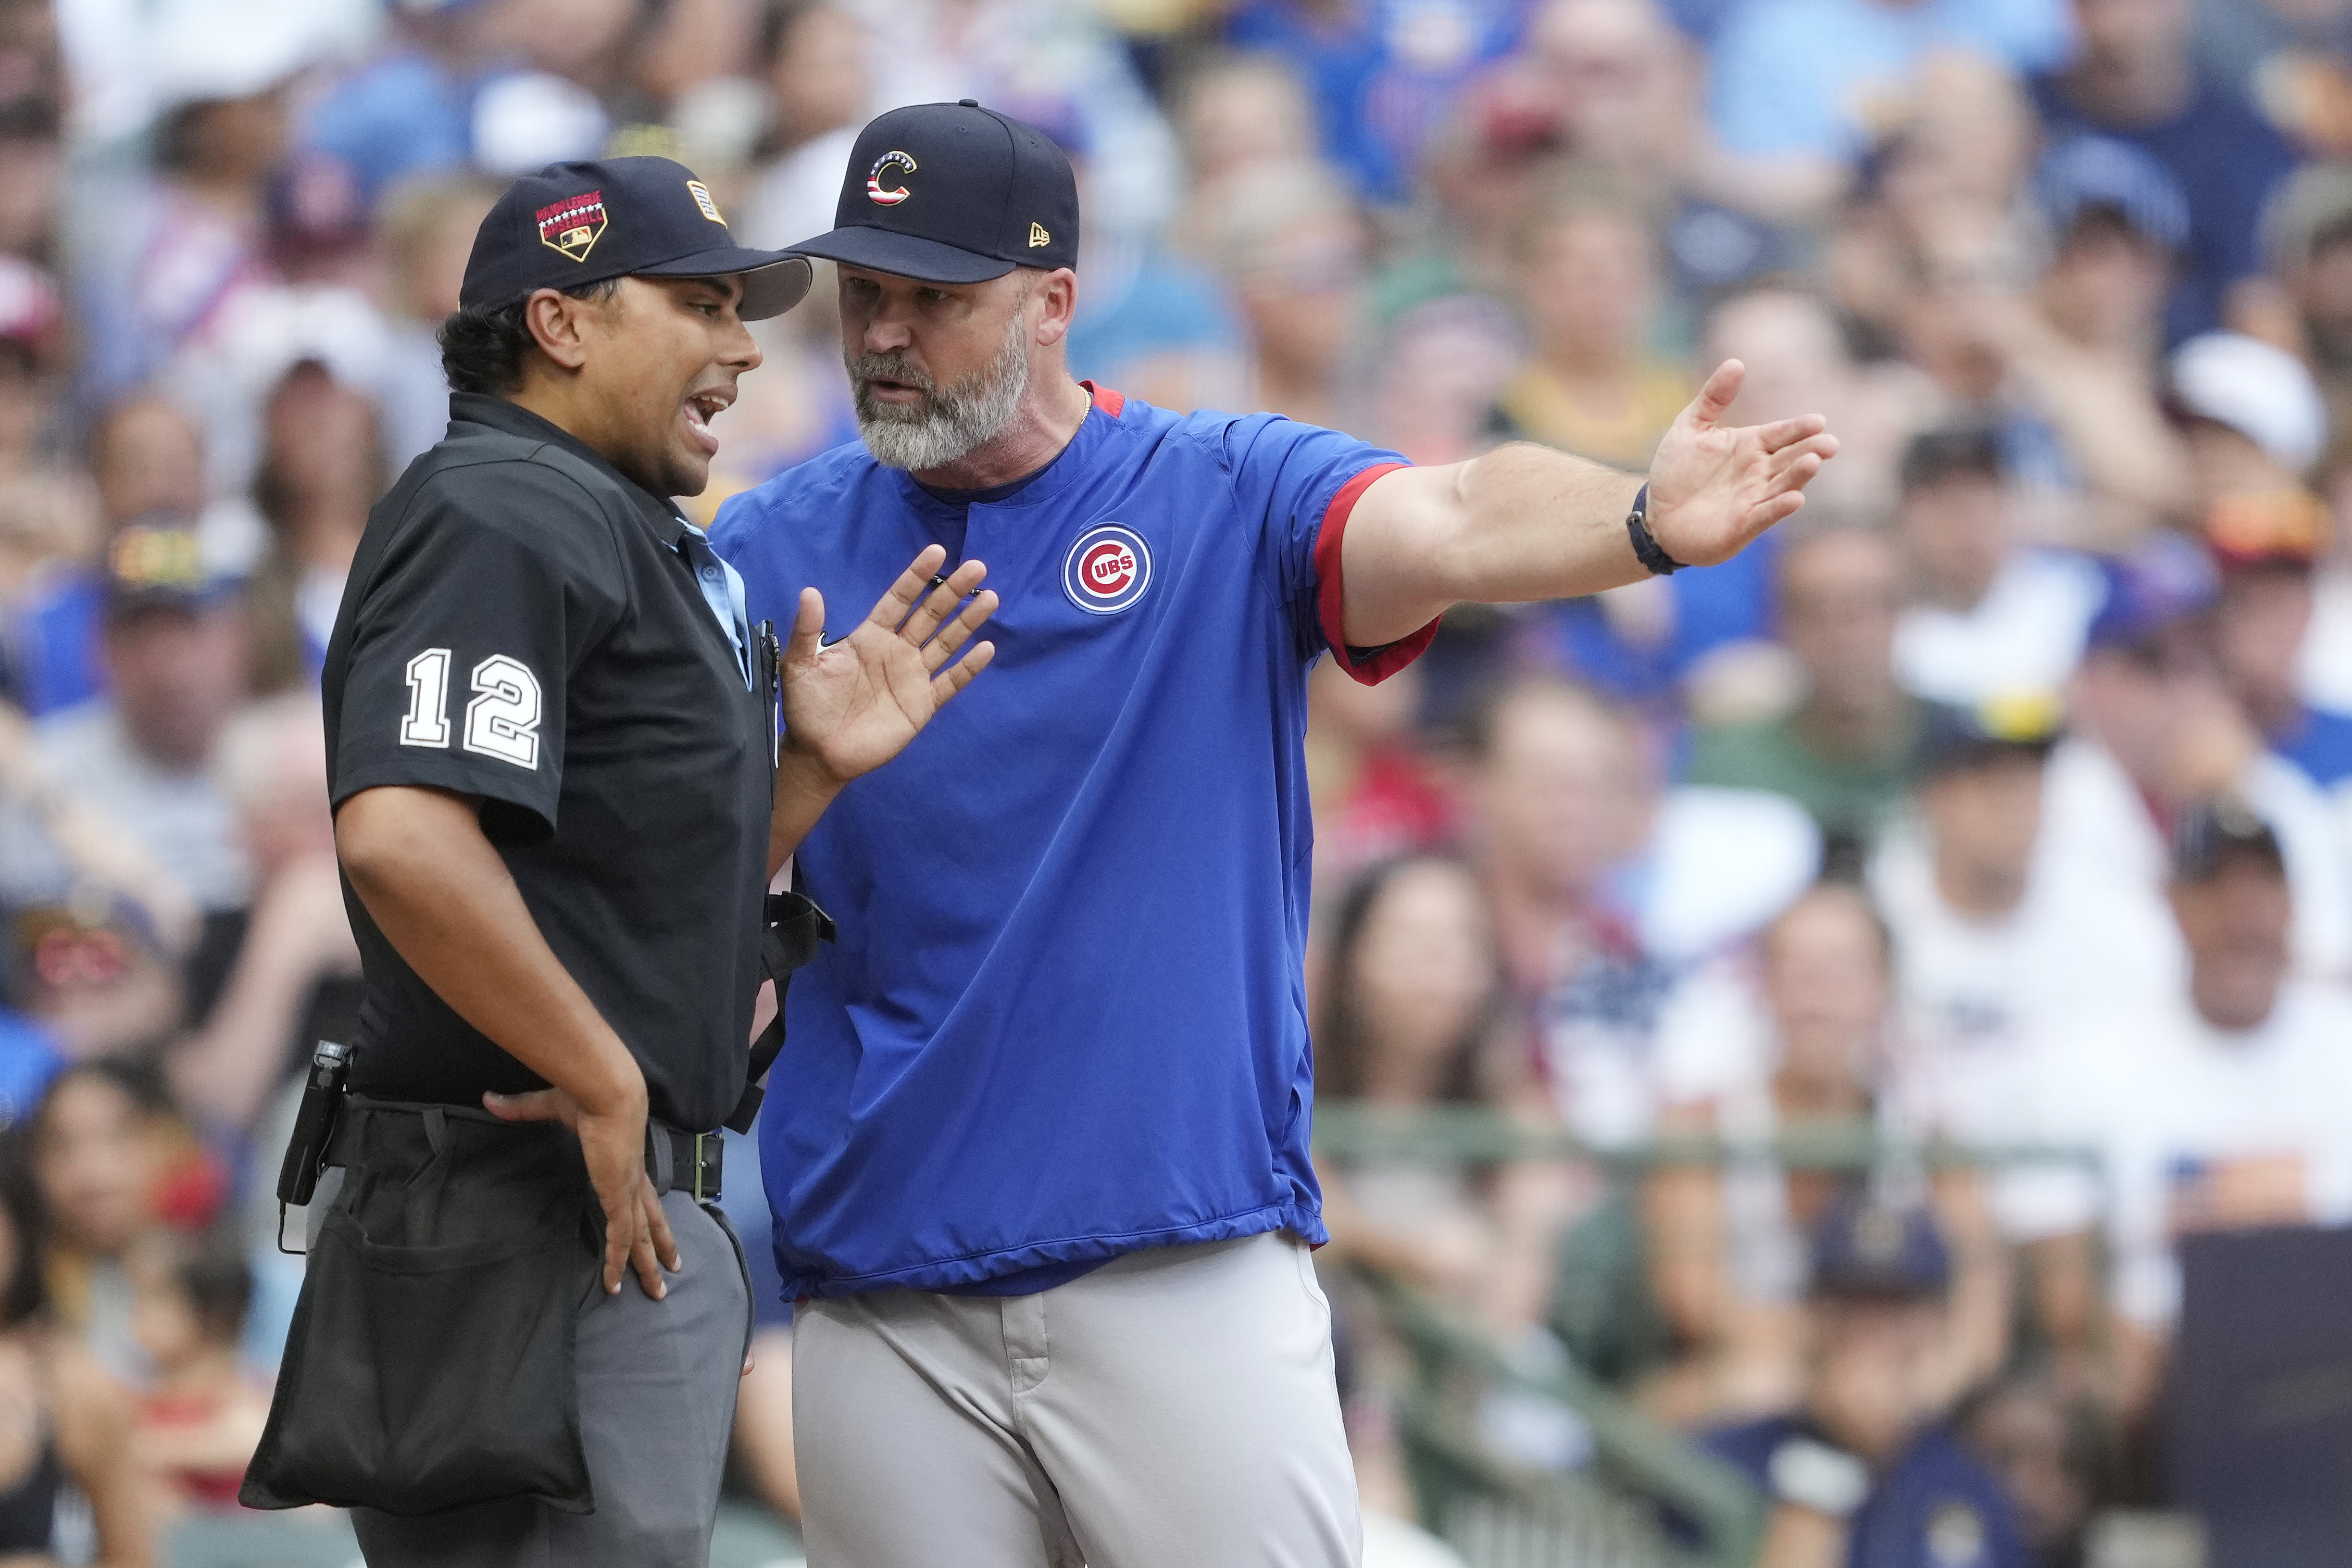 Cubs manager David Ross rips umpire and criticizes decision to